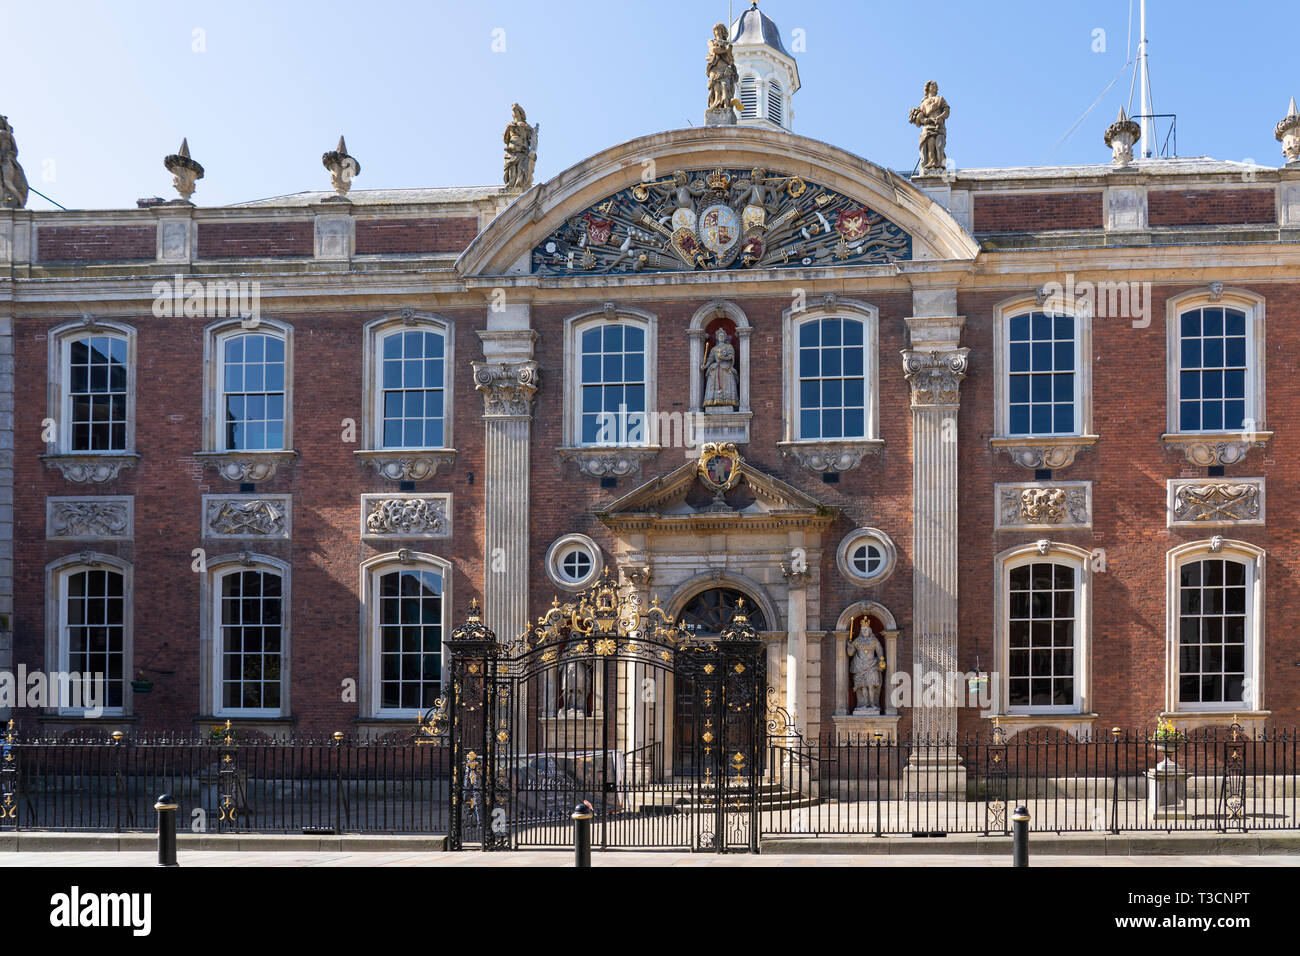 The front facade of Worcester Guildhall, a beautiful stone and brick Grade 1 listed building in the Georgian style dating back to 1721 Stock Photo